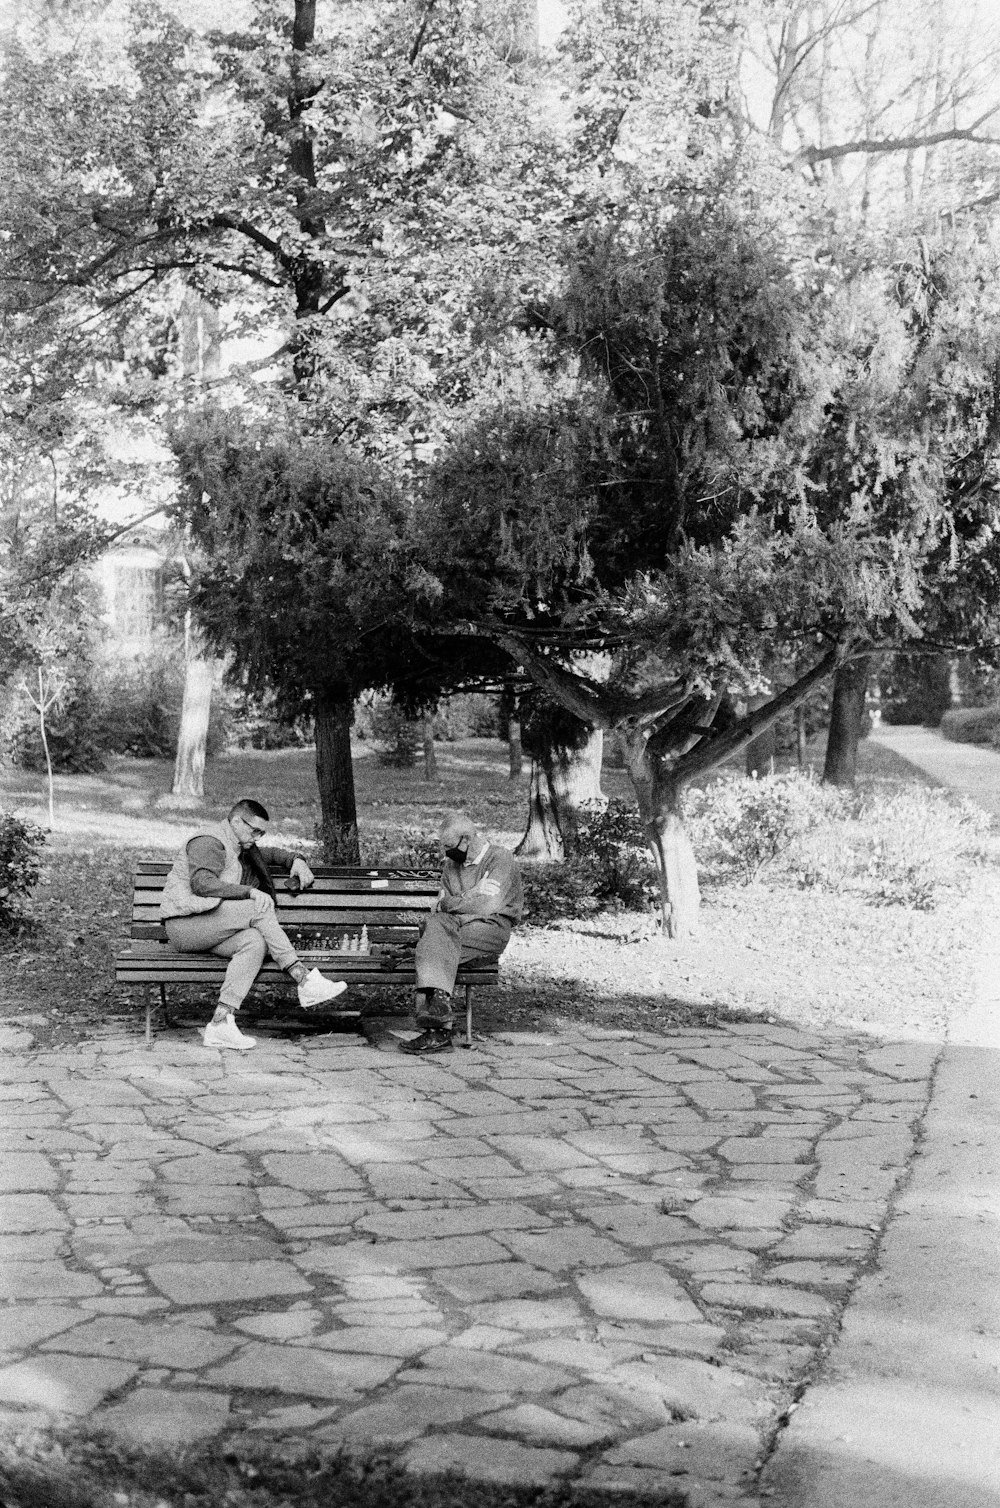 grayscale photo of 2 men sitting on bench near trees